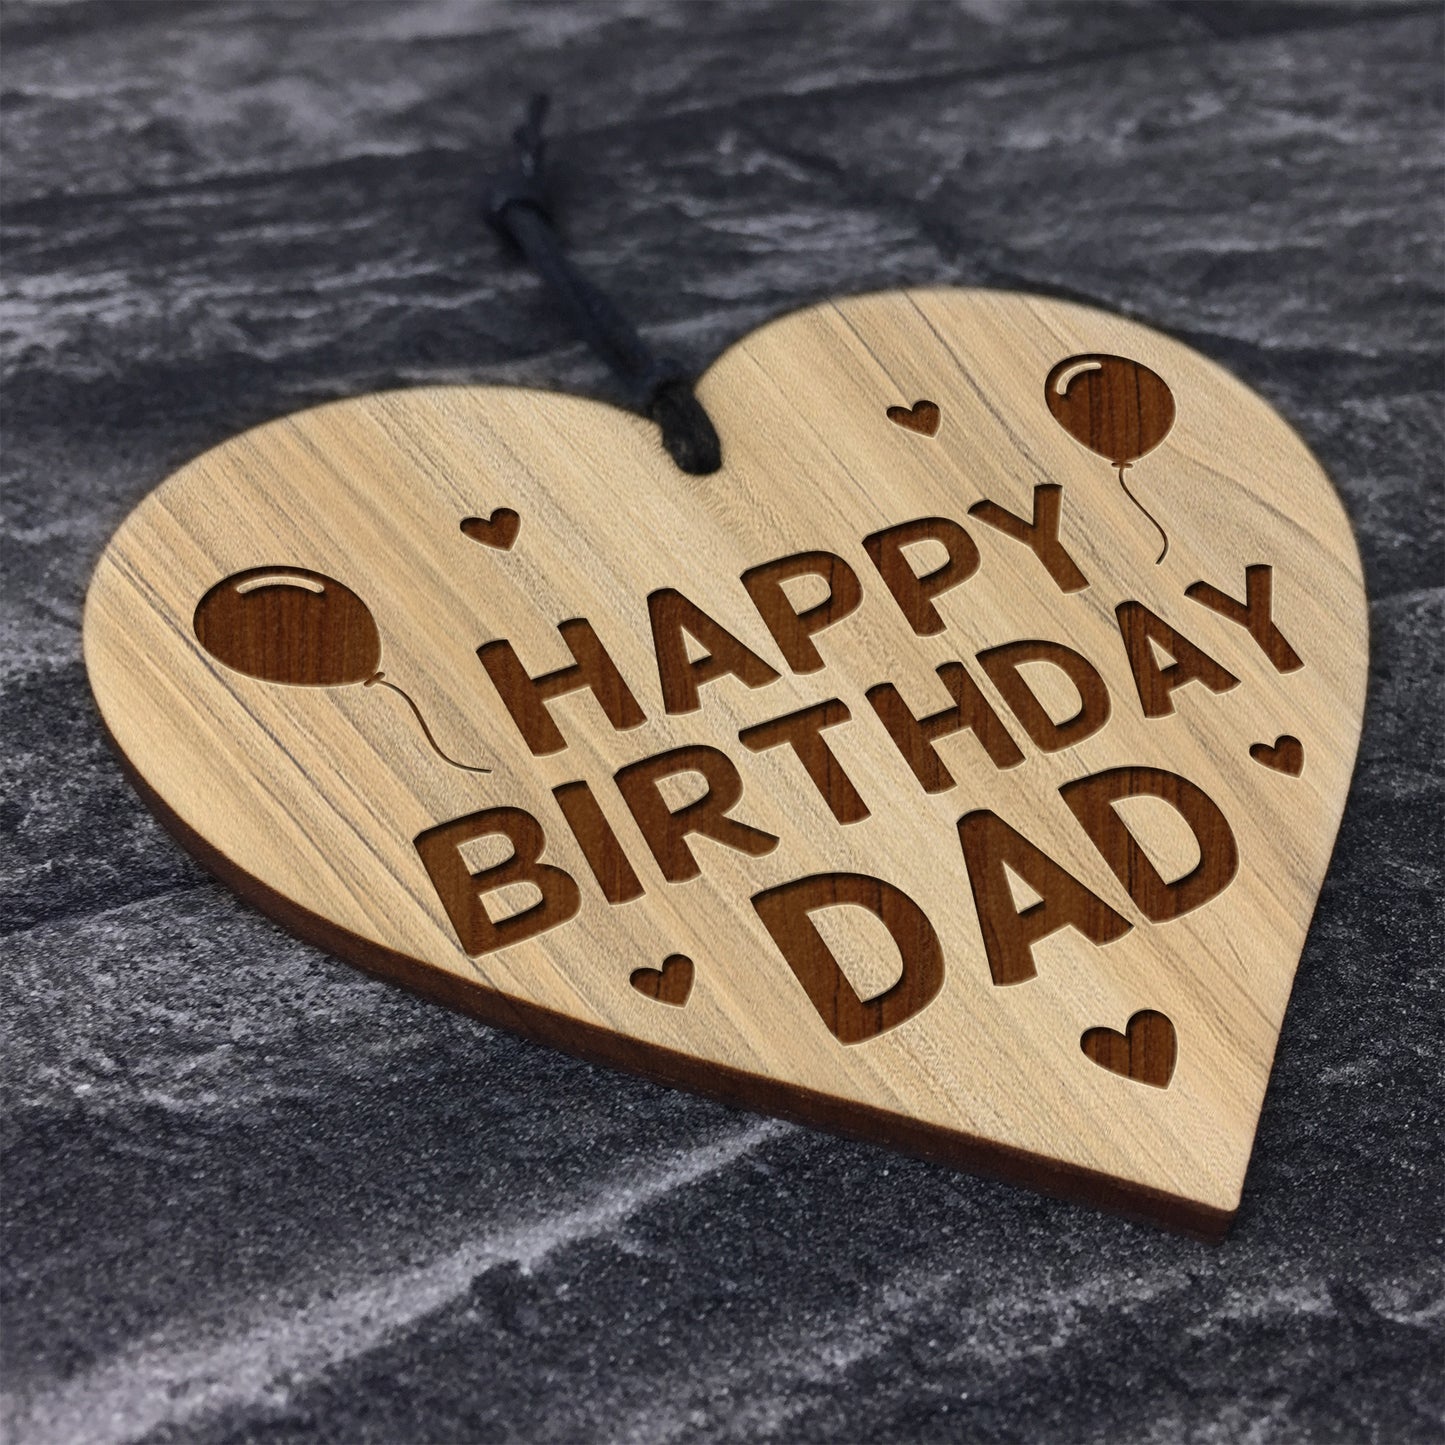 Birthday Gift For Dad Engraved Heart 30th 40th 50th Birthday